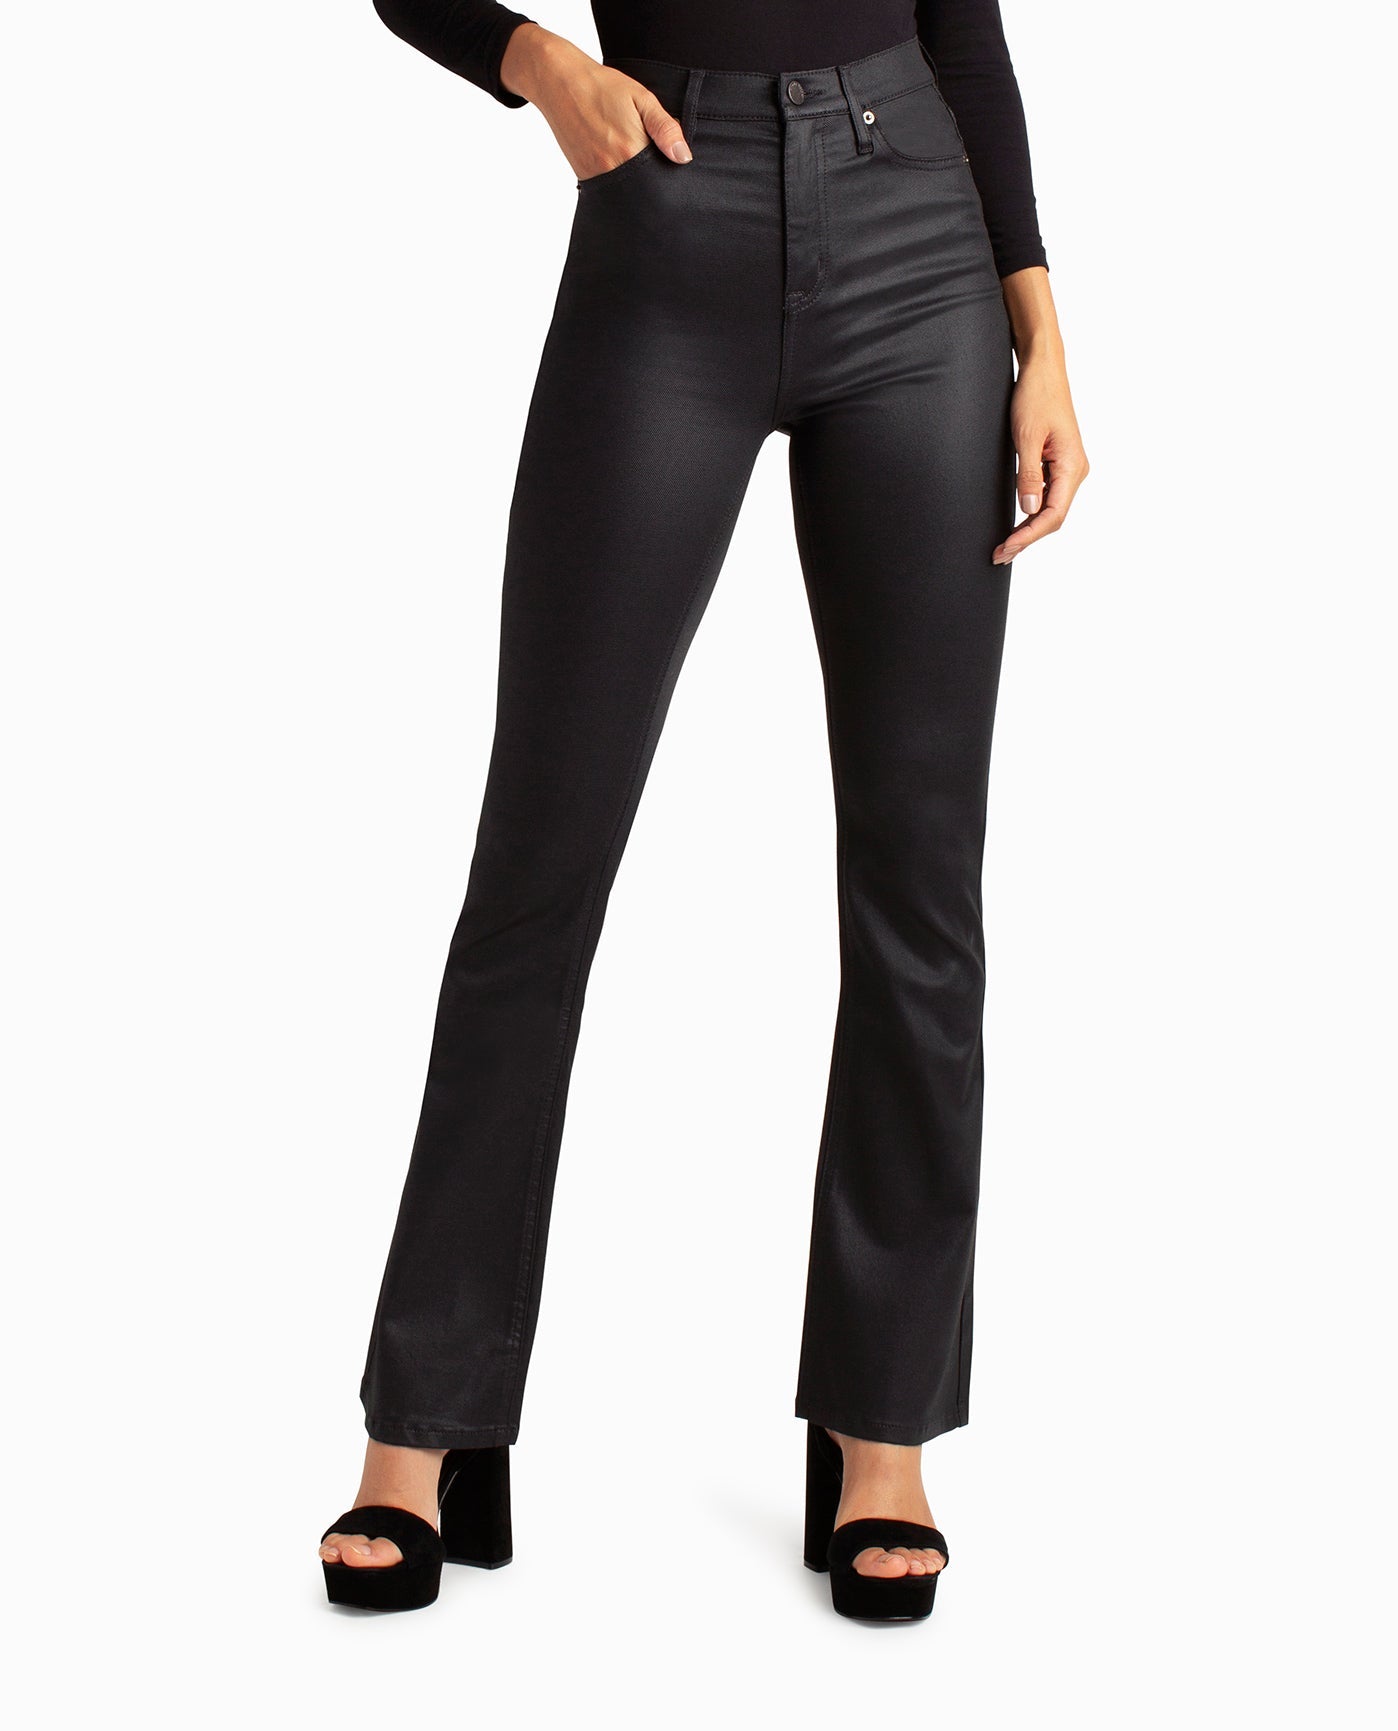 GLISTEN HIGH RISE FLARED JEAN WITH POCKETS | Black